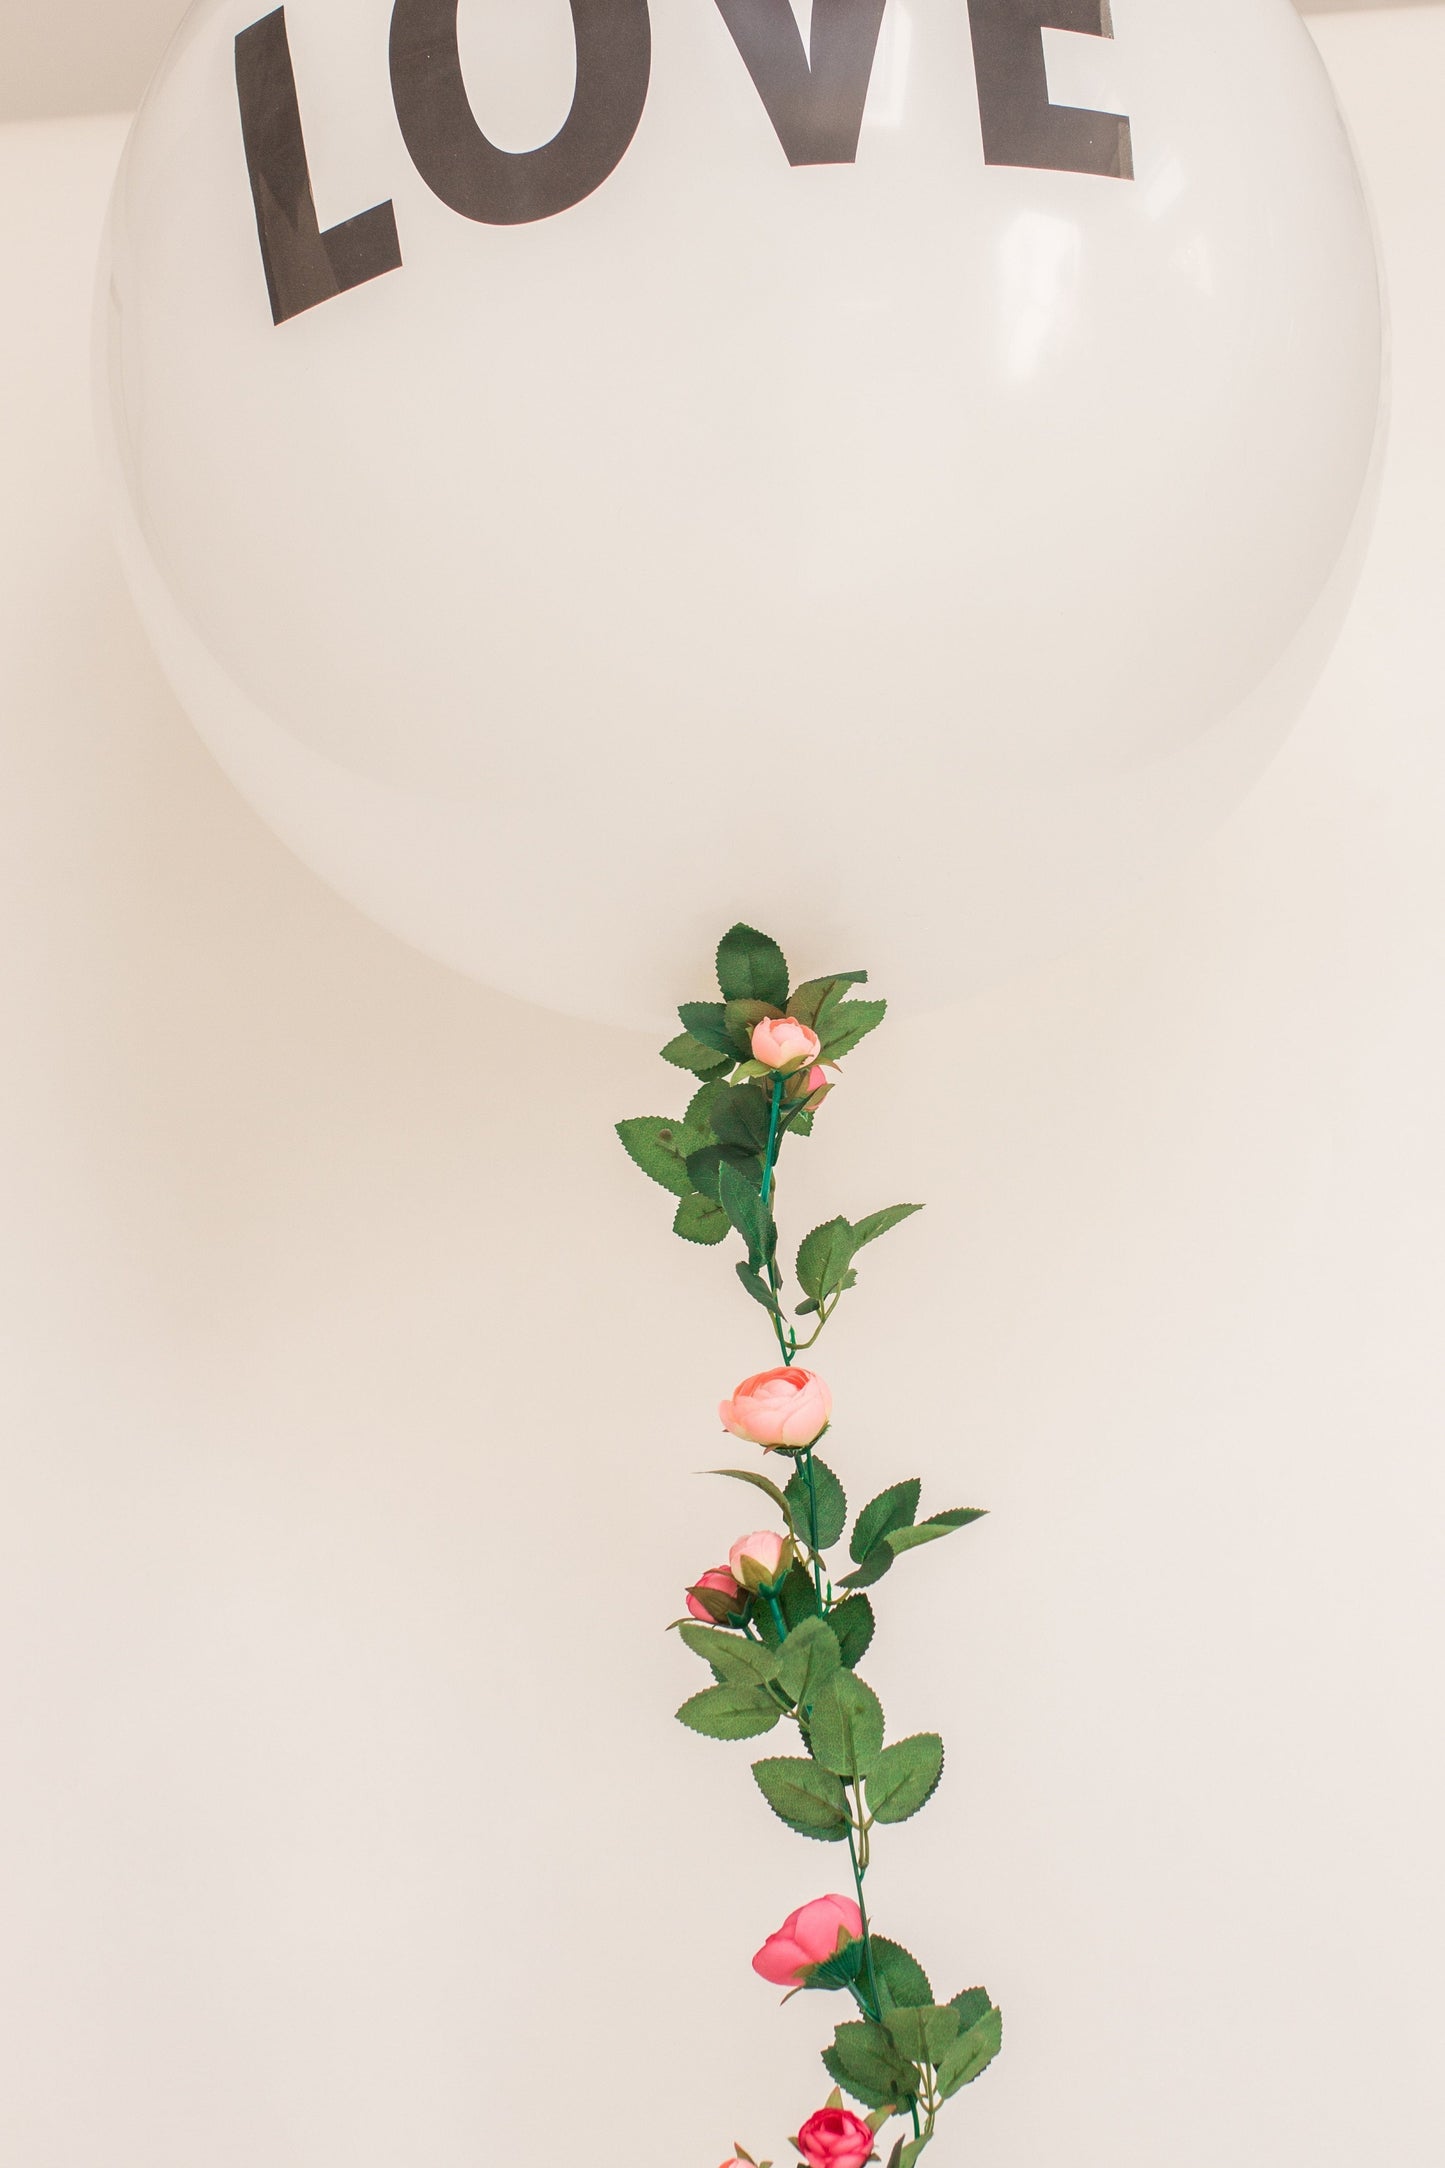 Flower Garland White | Artificial Flowers & Foliage for Parties Ginger Ray